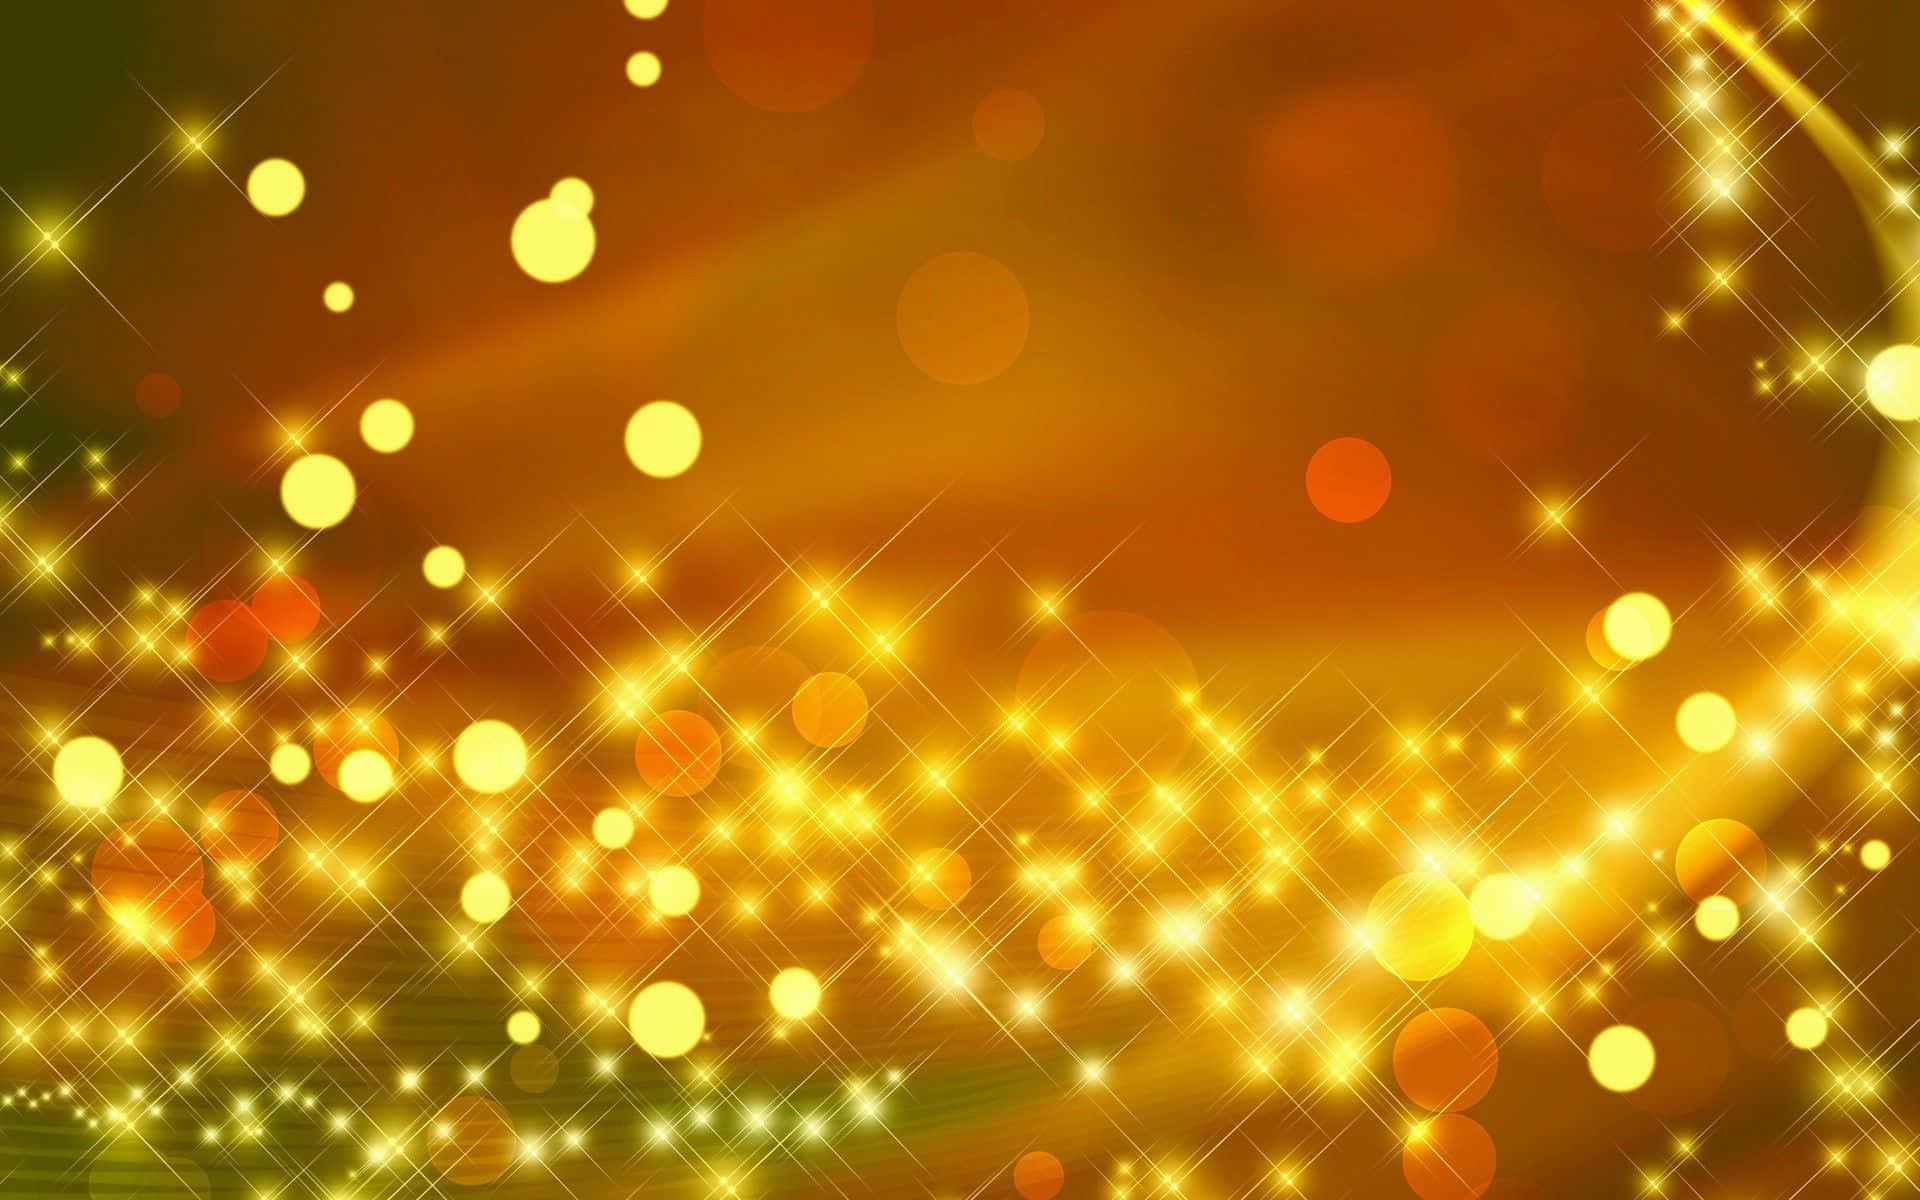 "Add a sparkle of joy to your day with Orange Glitter!" Wallpaper